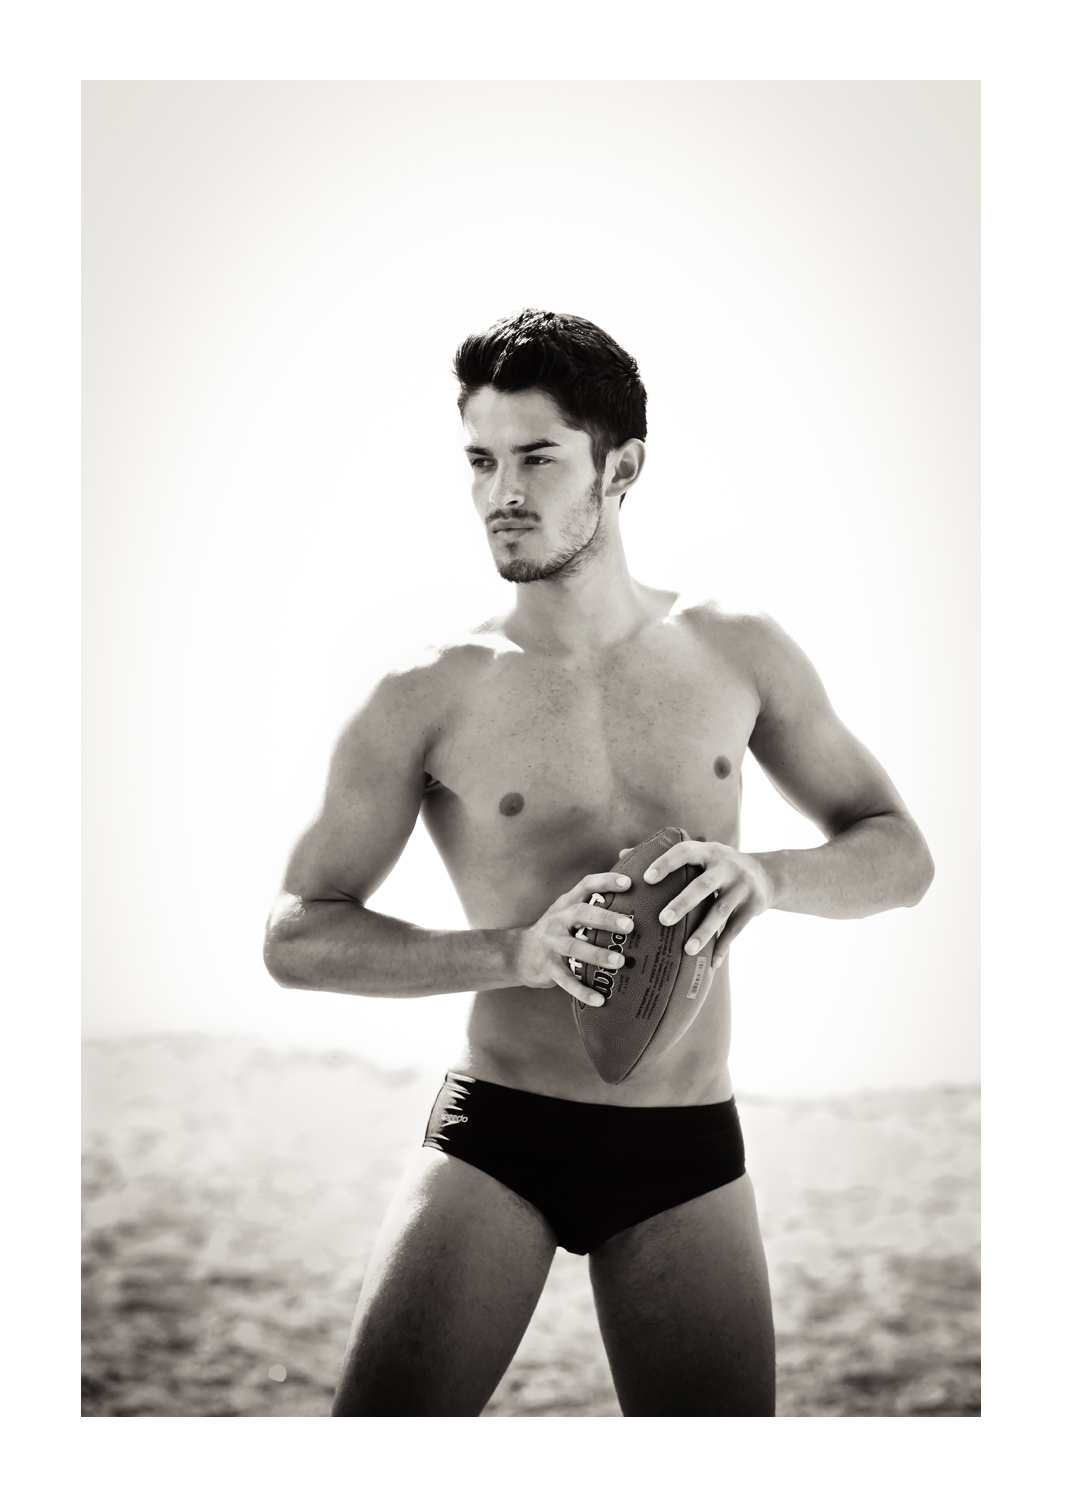 A young man with short dark hair stands in a black swim suit against a white sky holding a football in a ready-to-throw stance